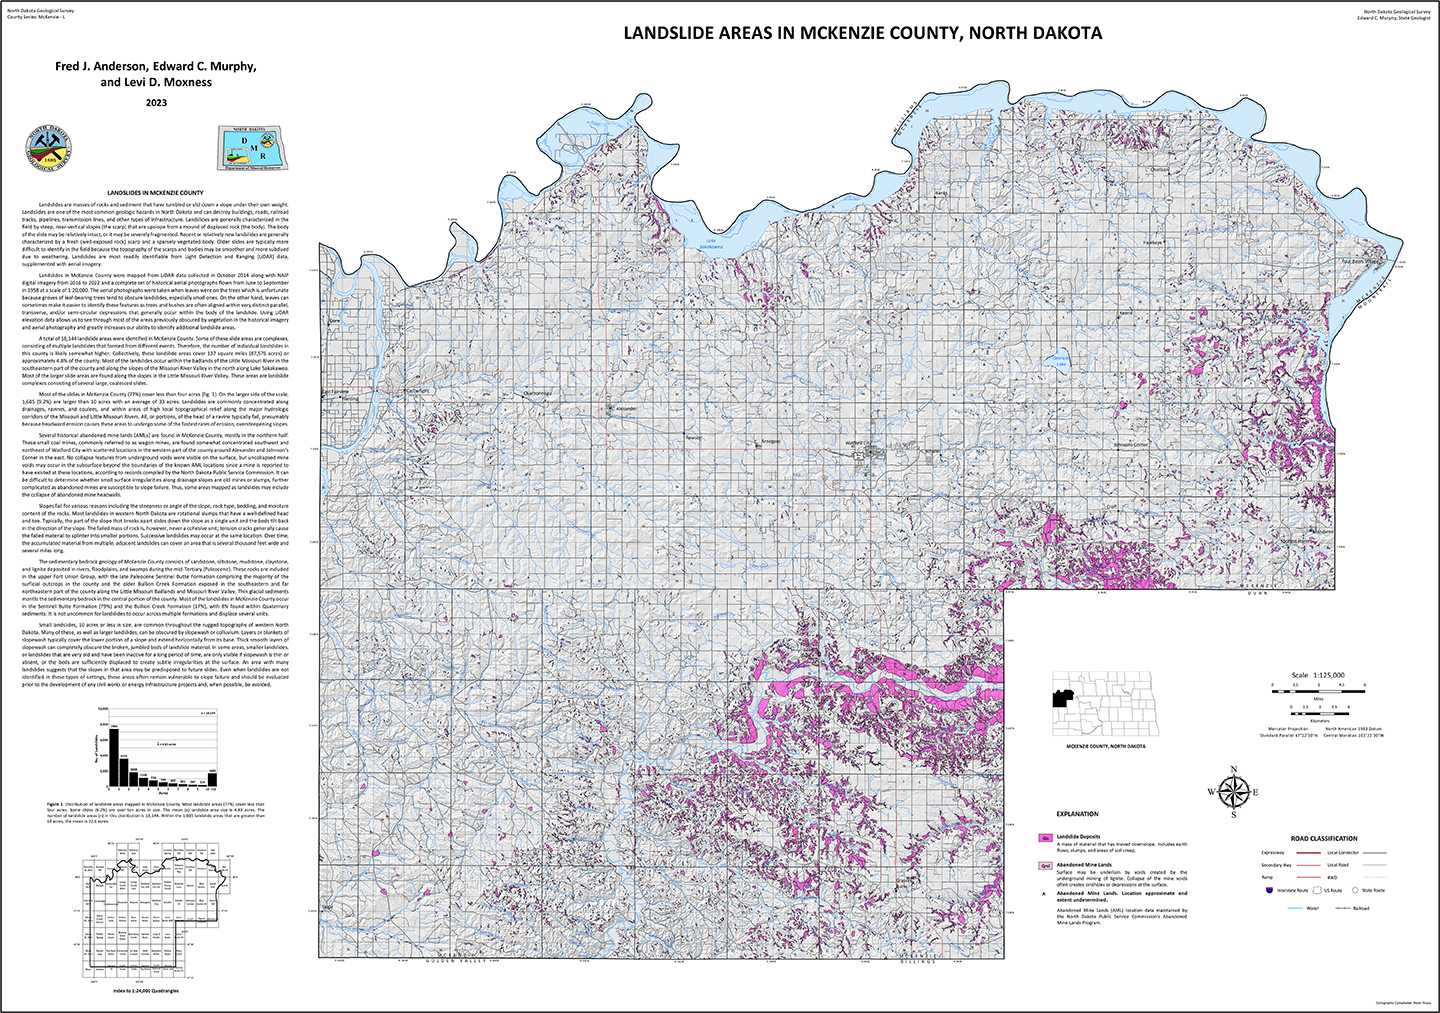 Map of McKenzie County showing landslides shaded in pink.